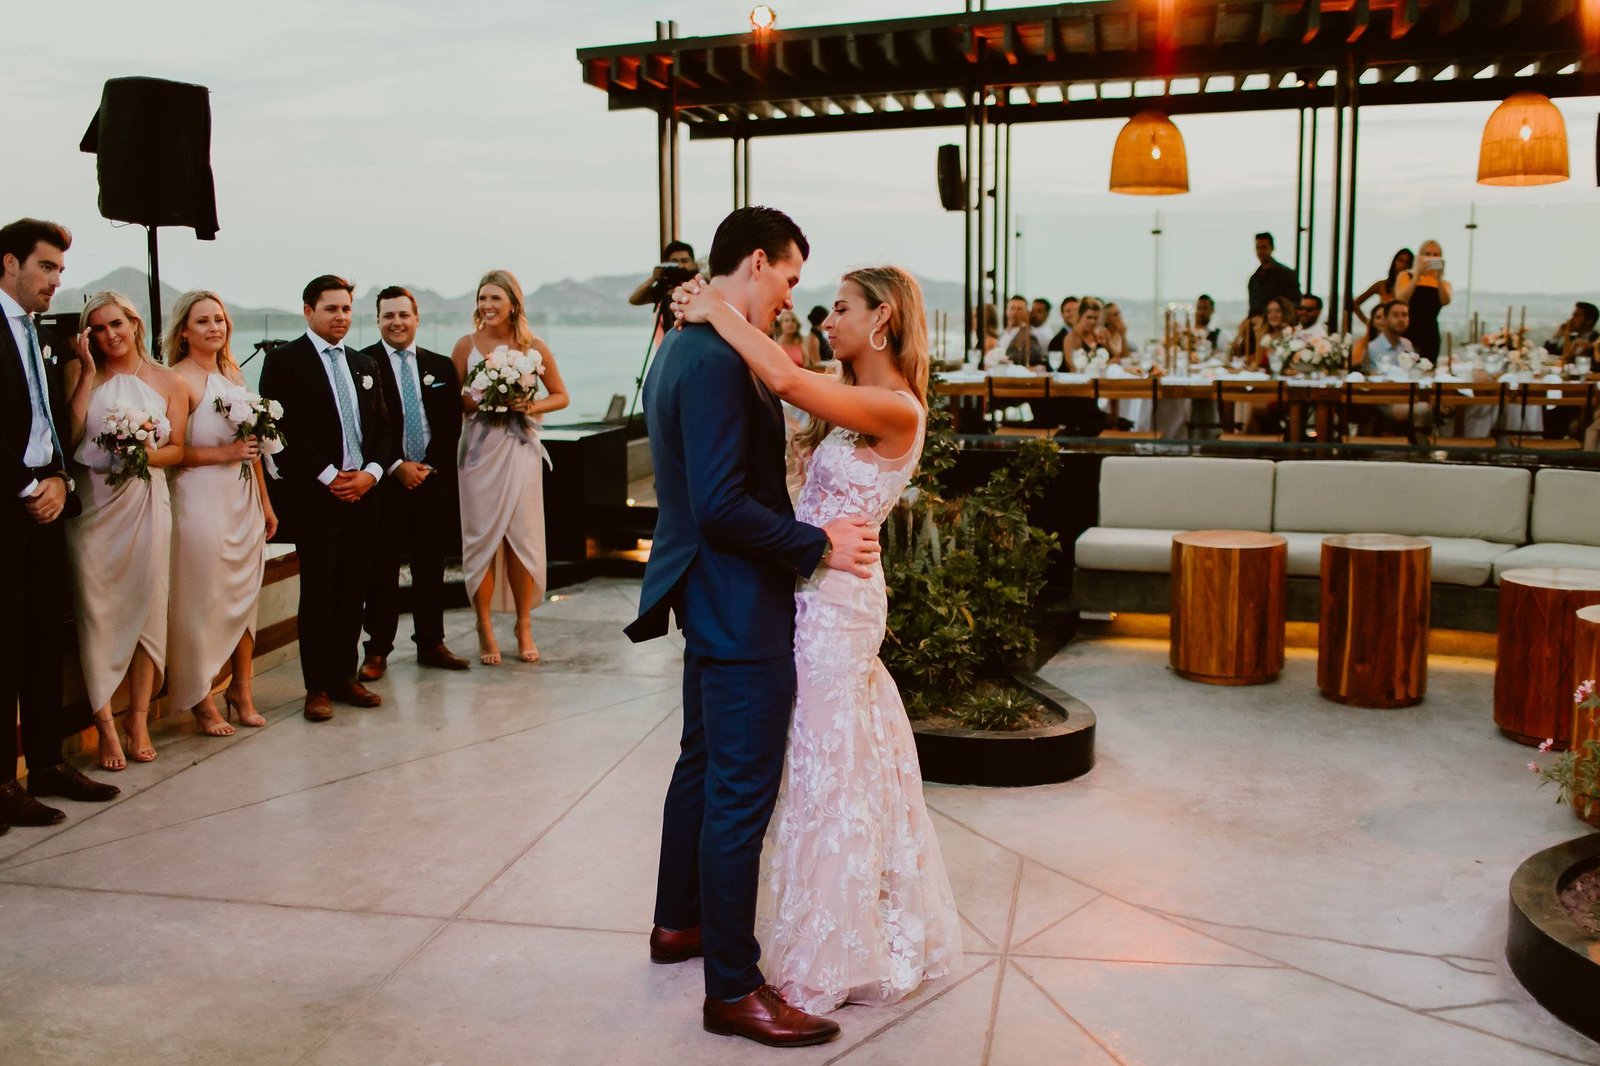 Bride and groom having their first dance at the rooftop at The Cape in Los Cabos, Mexico. They had all of their close family and friends watching as they has their first dance as husband and wife.